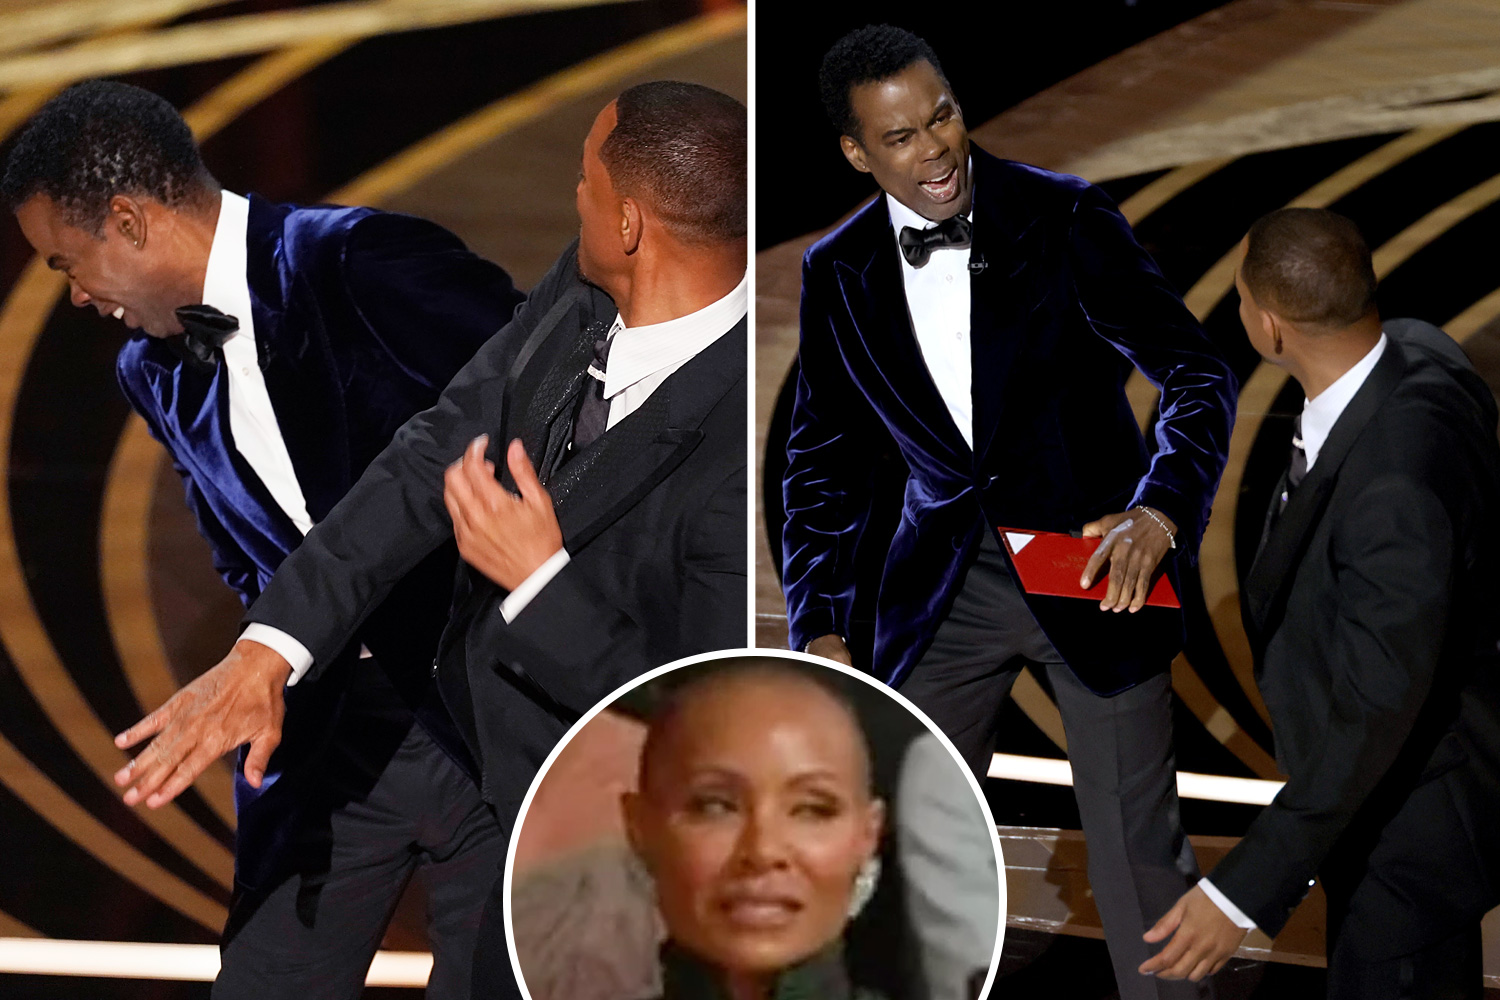 Will Smith 'SLAPS' Chris Rock on Oscars stage & curses comedian out